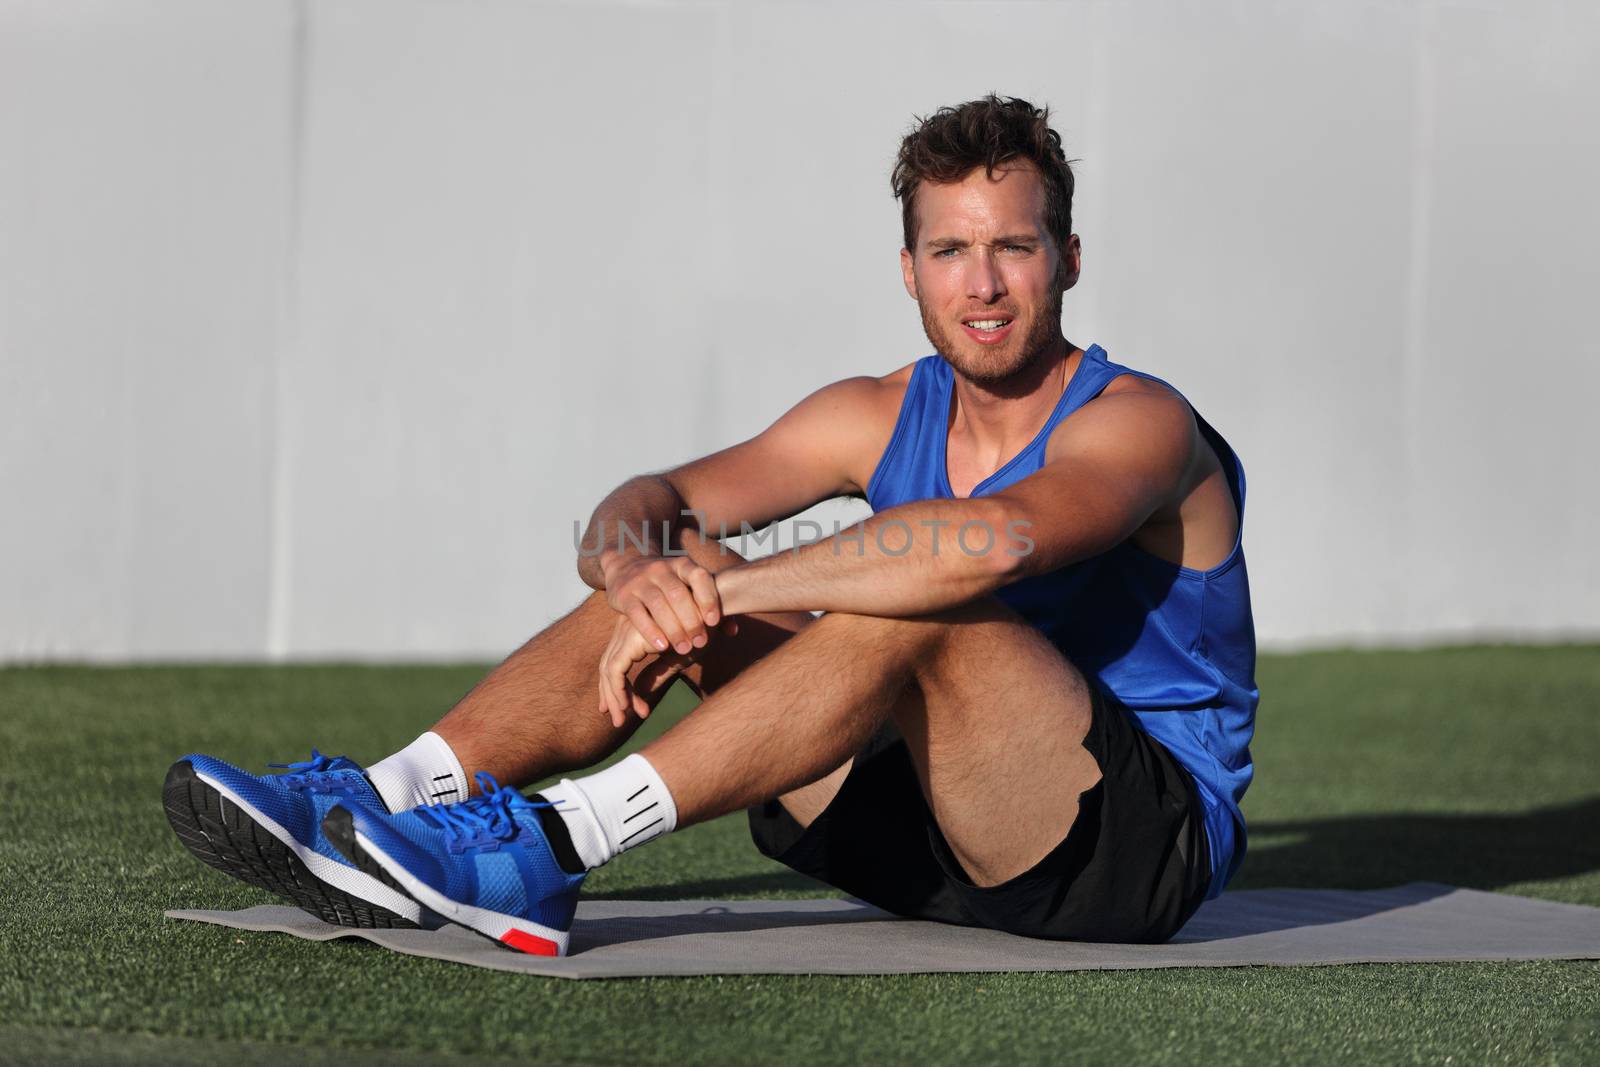 Gym fitness man portrait relaxing on exercise mat at outdoor park . Happy fit male athlete healthy active lifestyle ready for morning yoga practice at home outside on grass. by Maridav